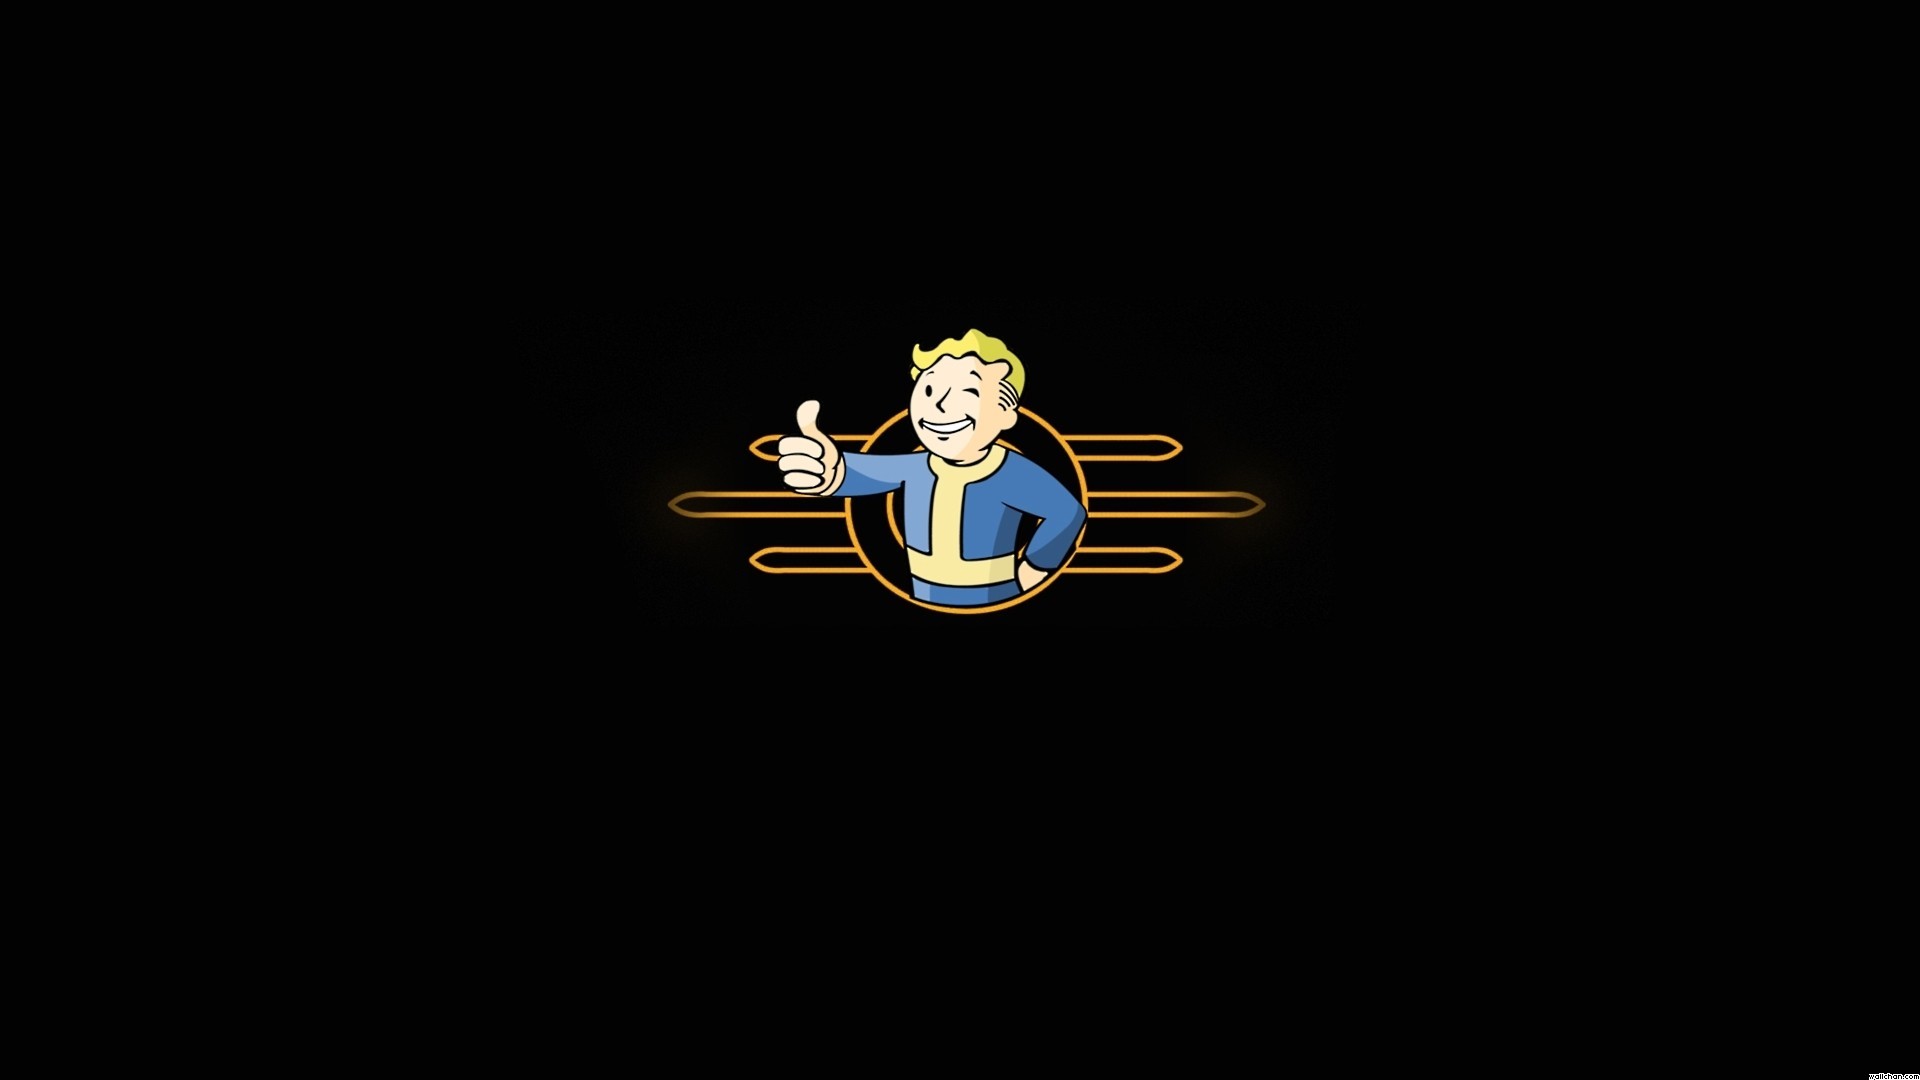 1920x1080 ... fallout vault boy wallpapers hd desktop and mobile backgrounds ...